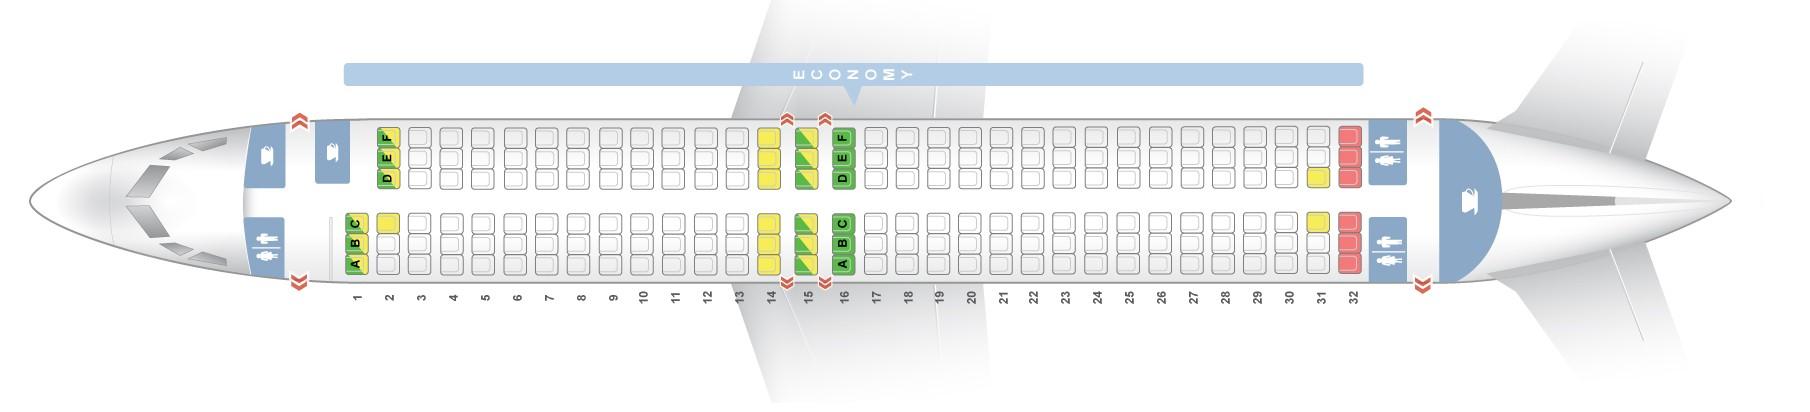 Seat Map Boeing 737 800 Flydubai Best Seats In The Plane